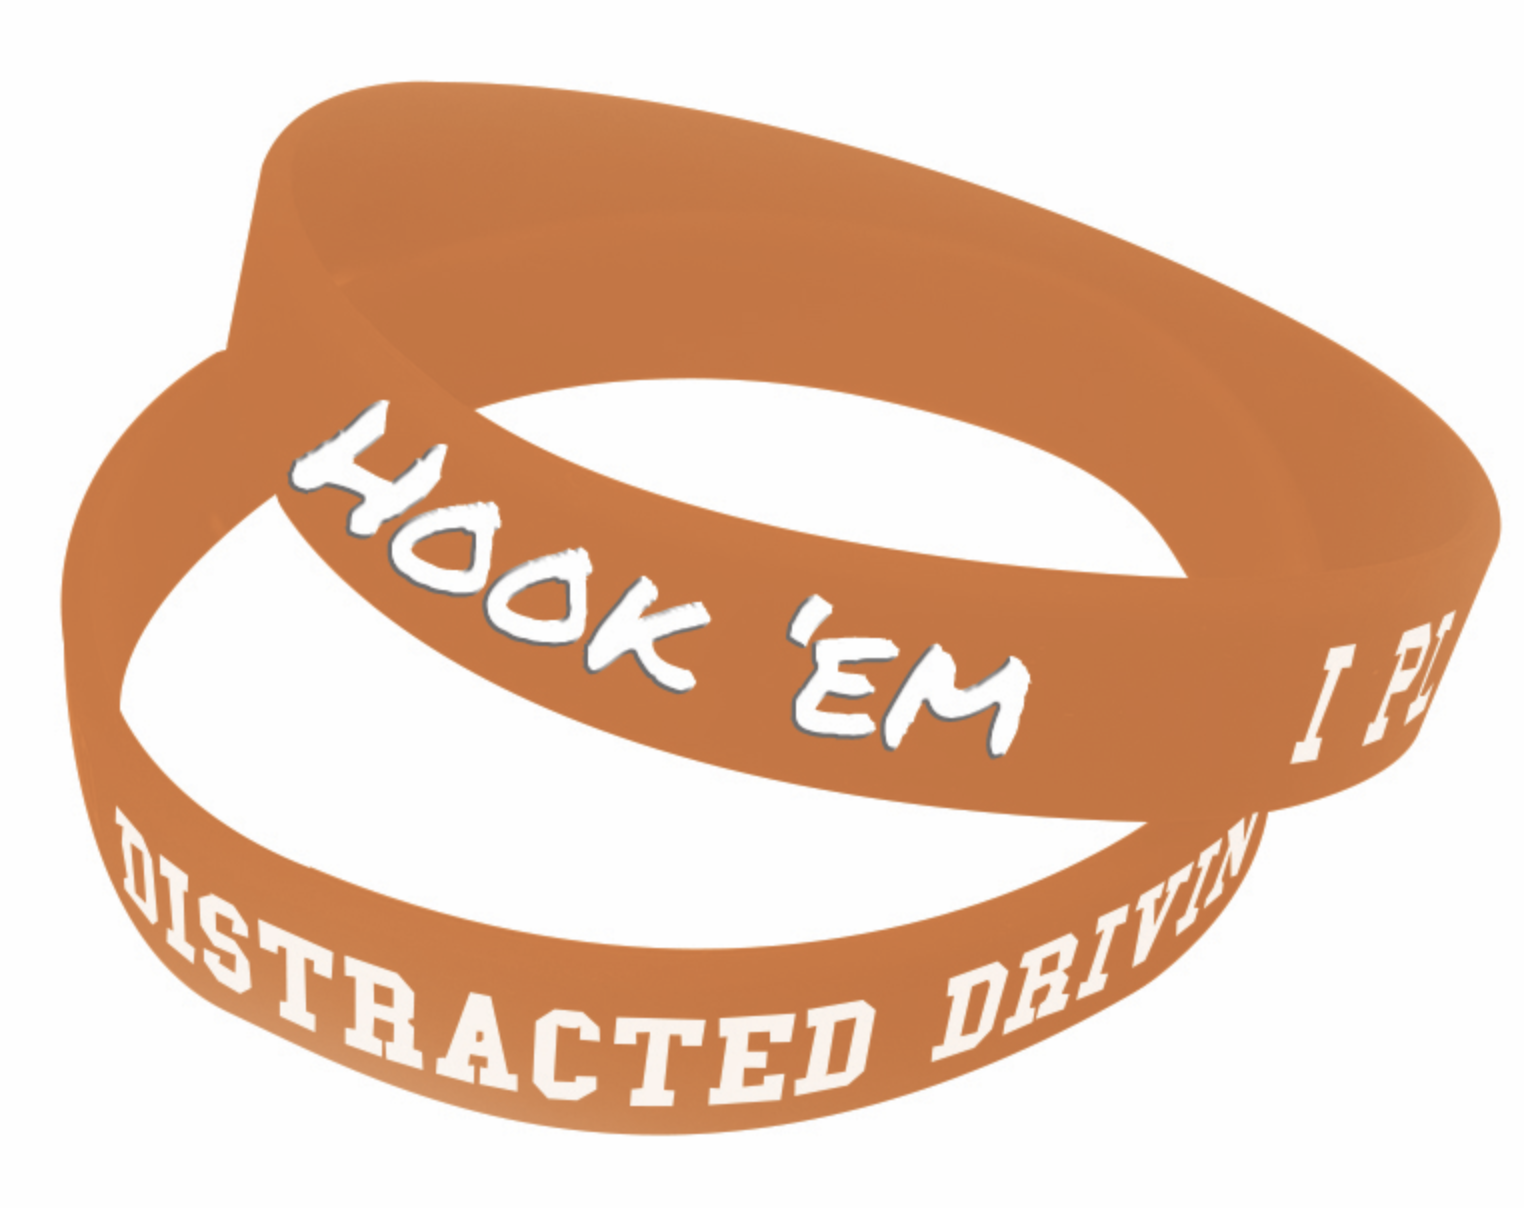 Texas at Austin Wristband.png